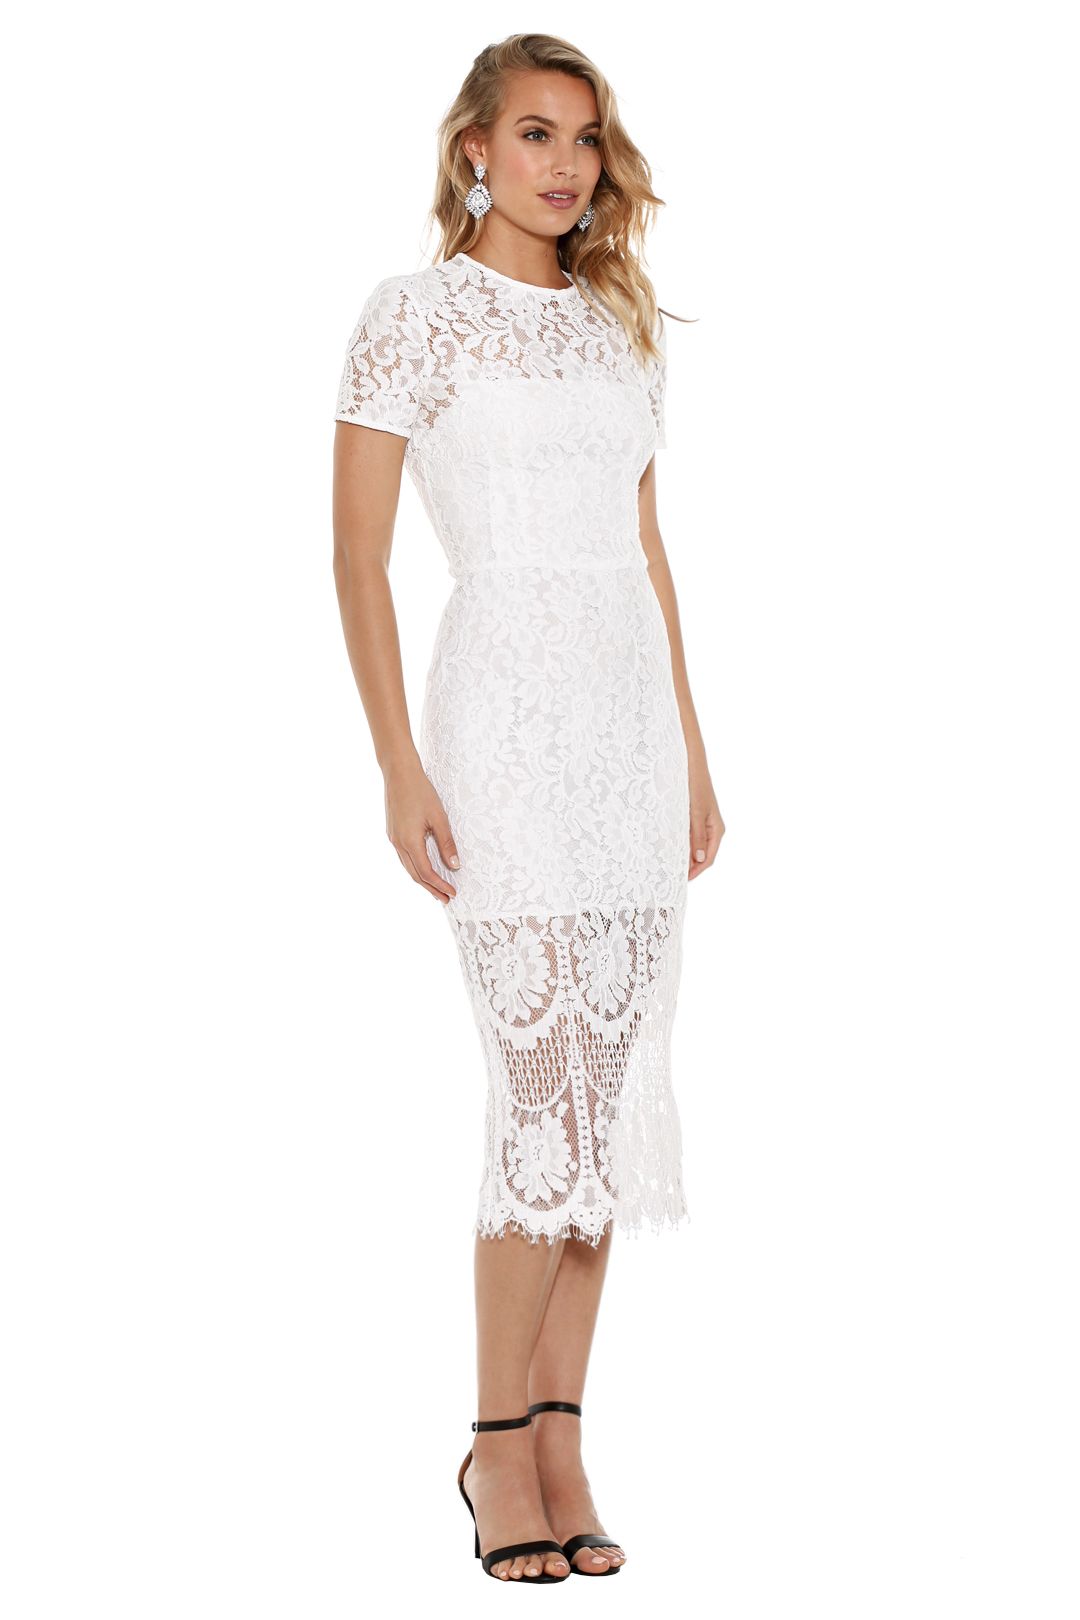 Lover - Snow Lace Sheath Dress - White - Side